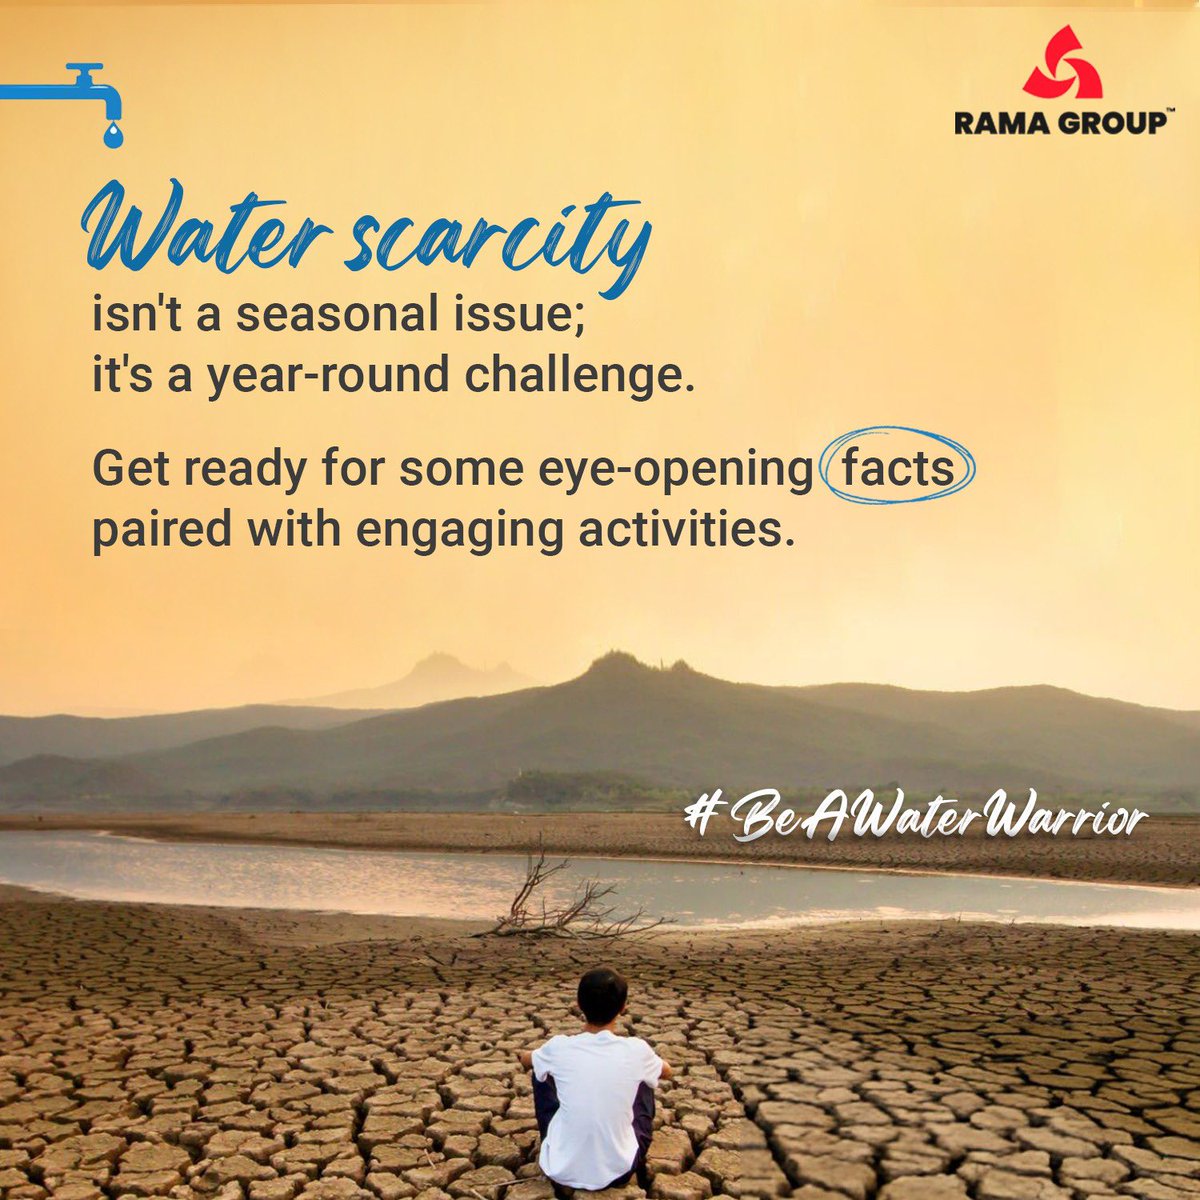 Water scarcity knows no season! It’s time to face the truth: the challenge of water scarcity persists throughout the year. But don’t worry, we’re here to shed light on the issue with a blend of insightful facts and enjoyable activities. #WaterConservation #SaveWater #RamaGroup